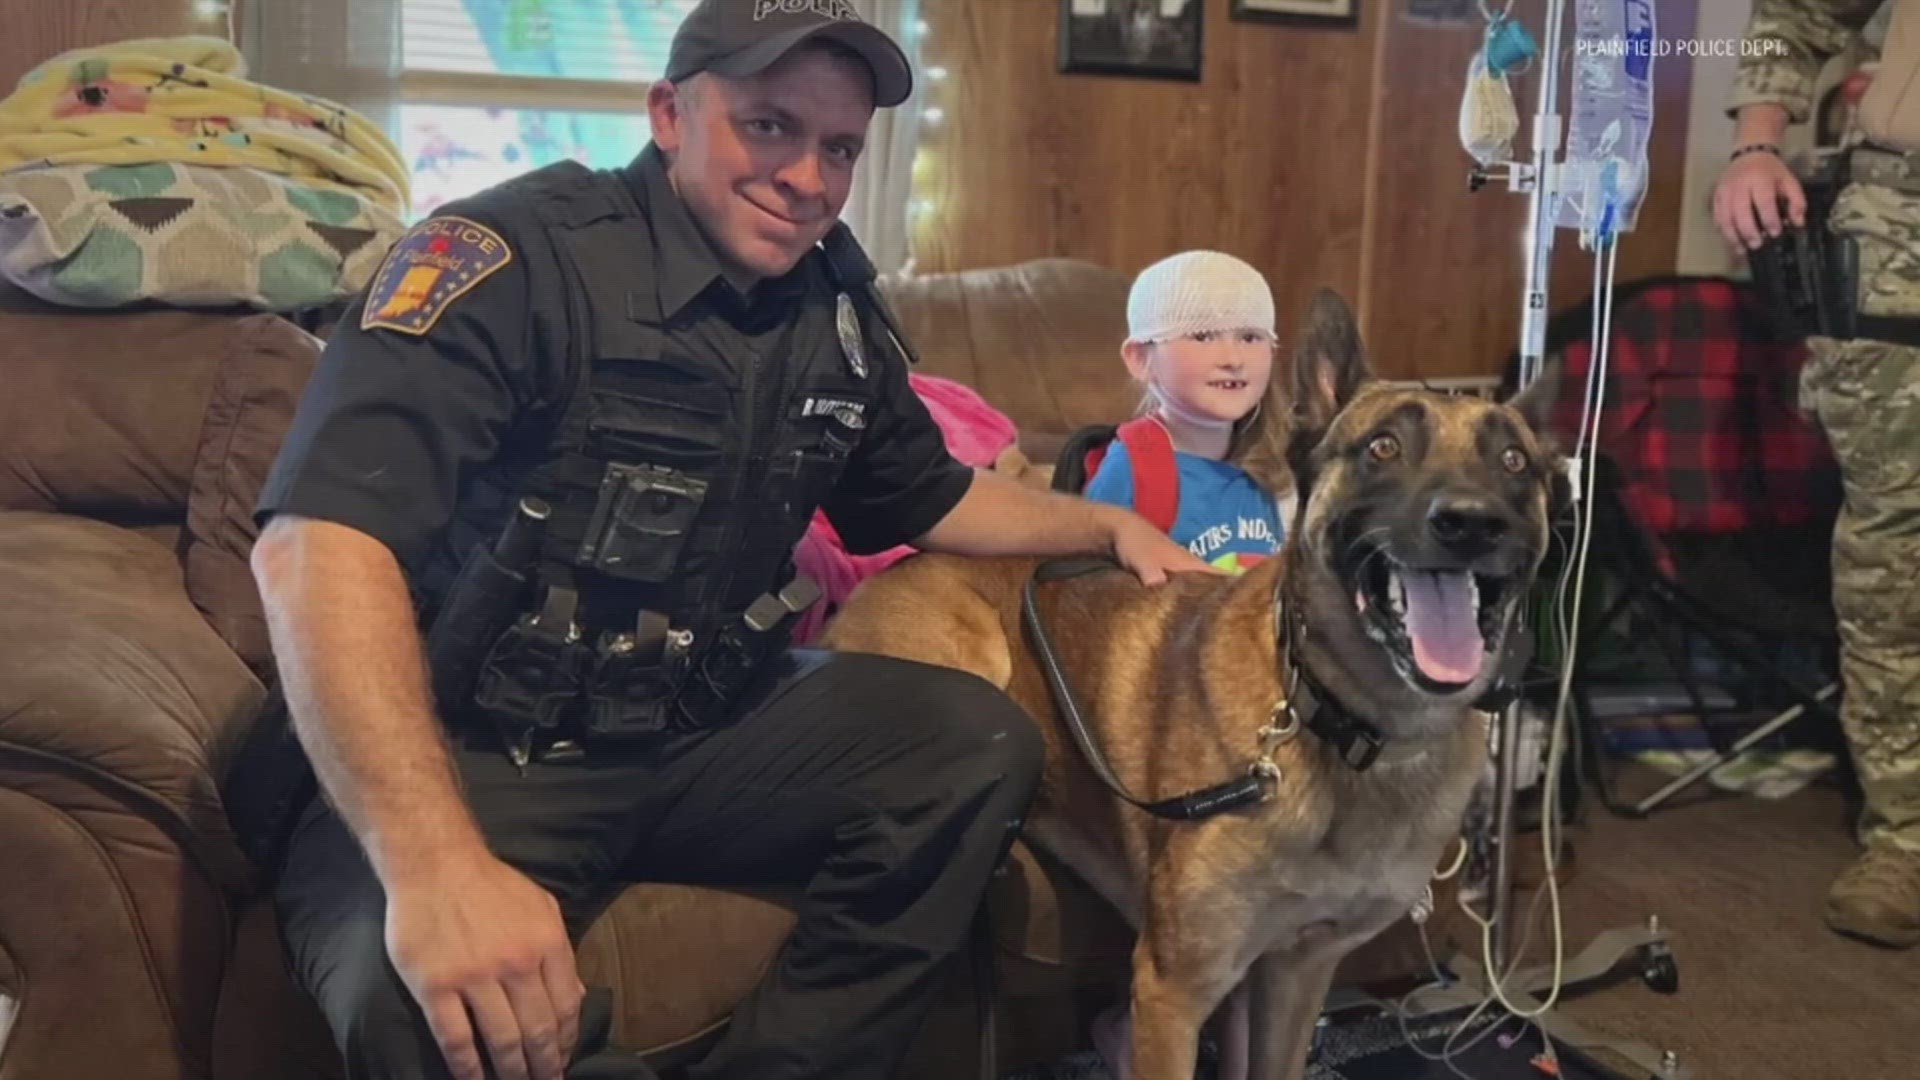 Plainfield police taught Elayah, 7, some basic commands typically used by K-9 officers during a heartwarming visit.